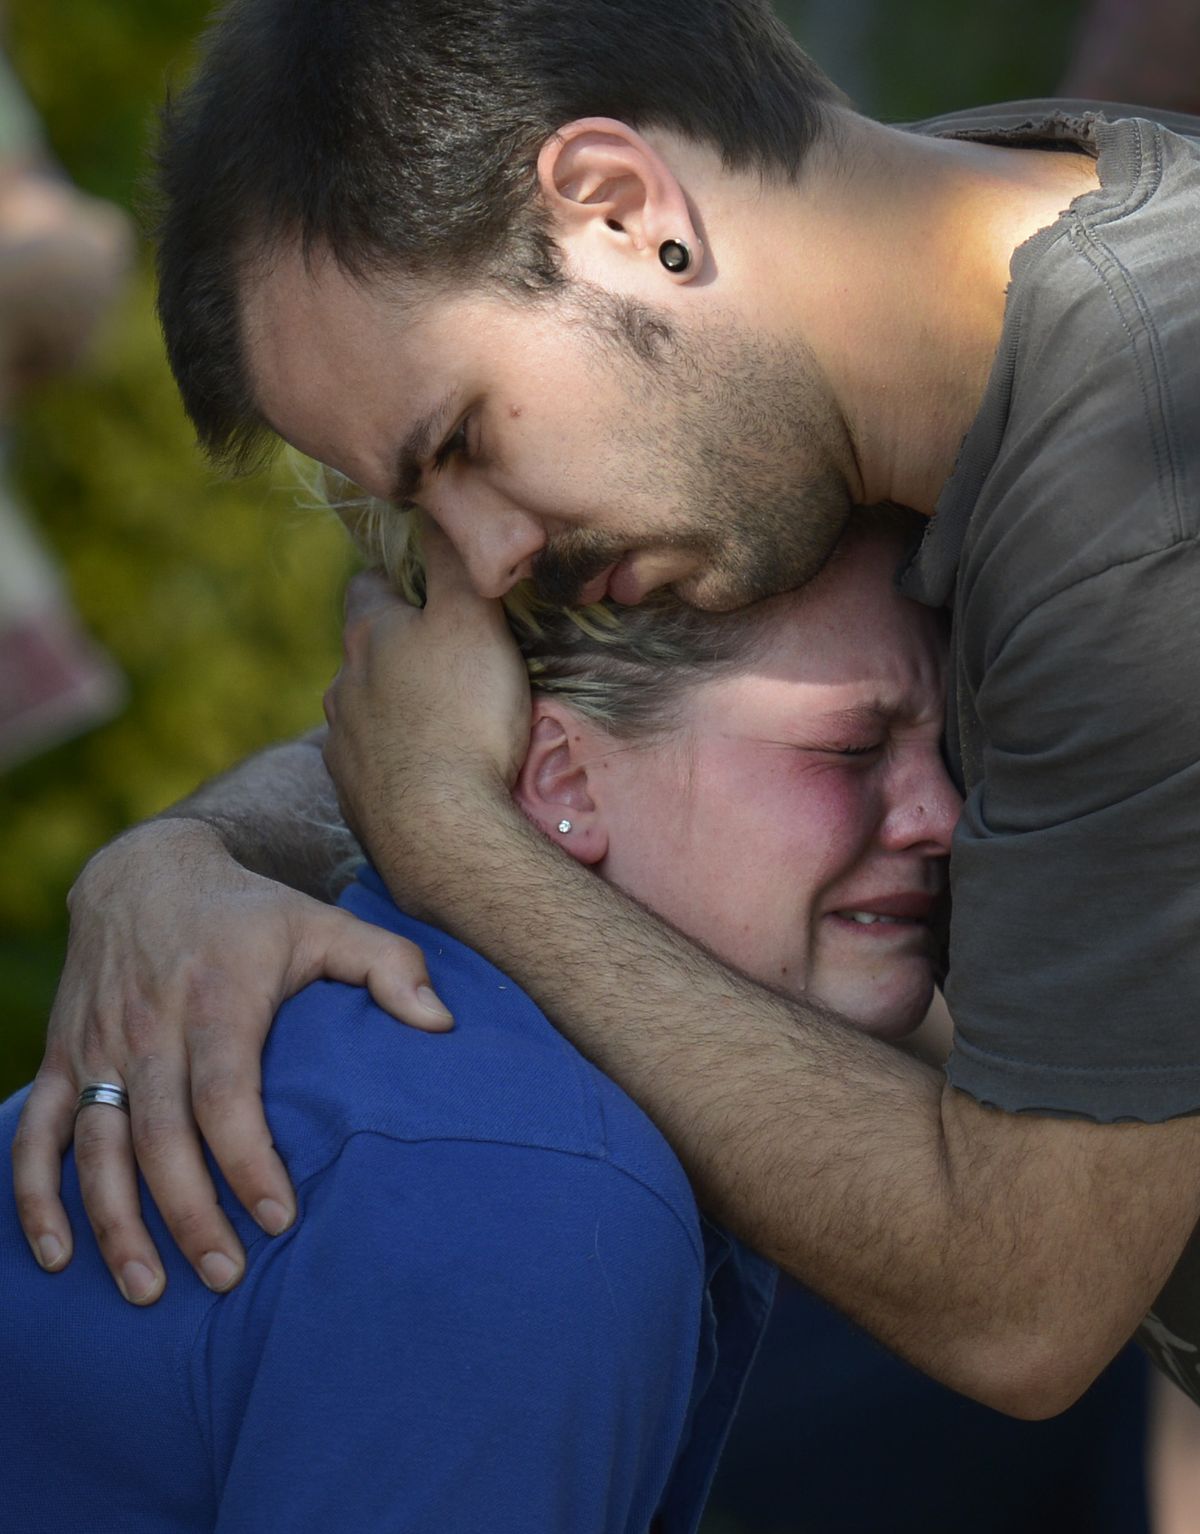 Nick Peraud consoles his fiancee, Skye Foster, as Spokane firefighters battle a blaze that consumed their residence on the 1200 block of East Nora Avenue in Spokane on Wednesday. (Colin Mulvany)